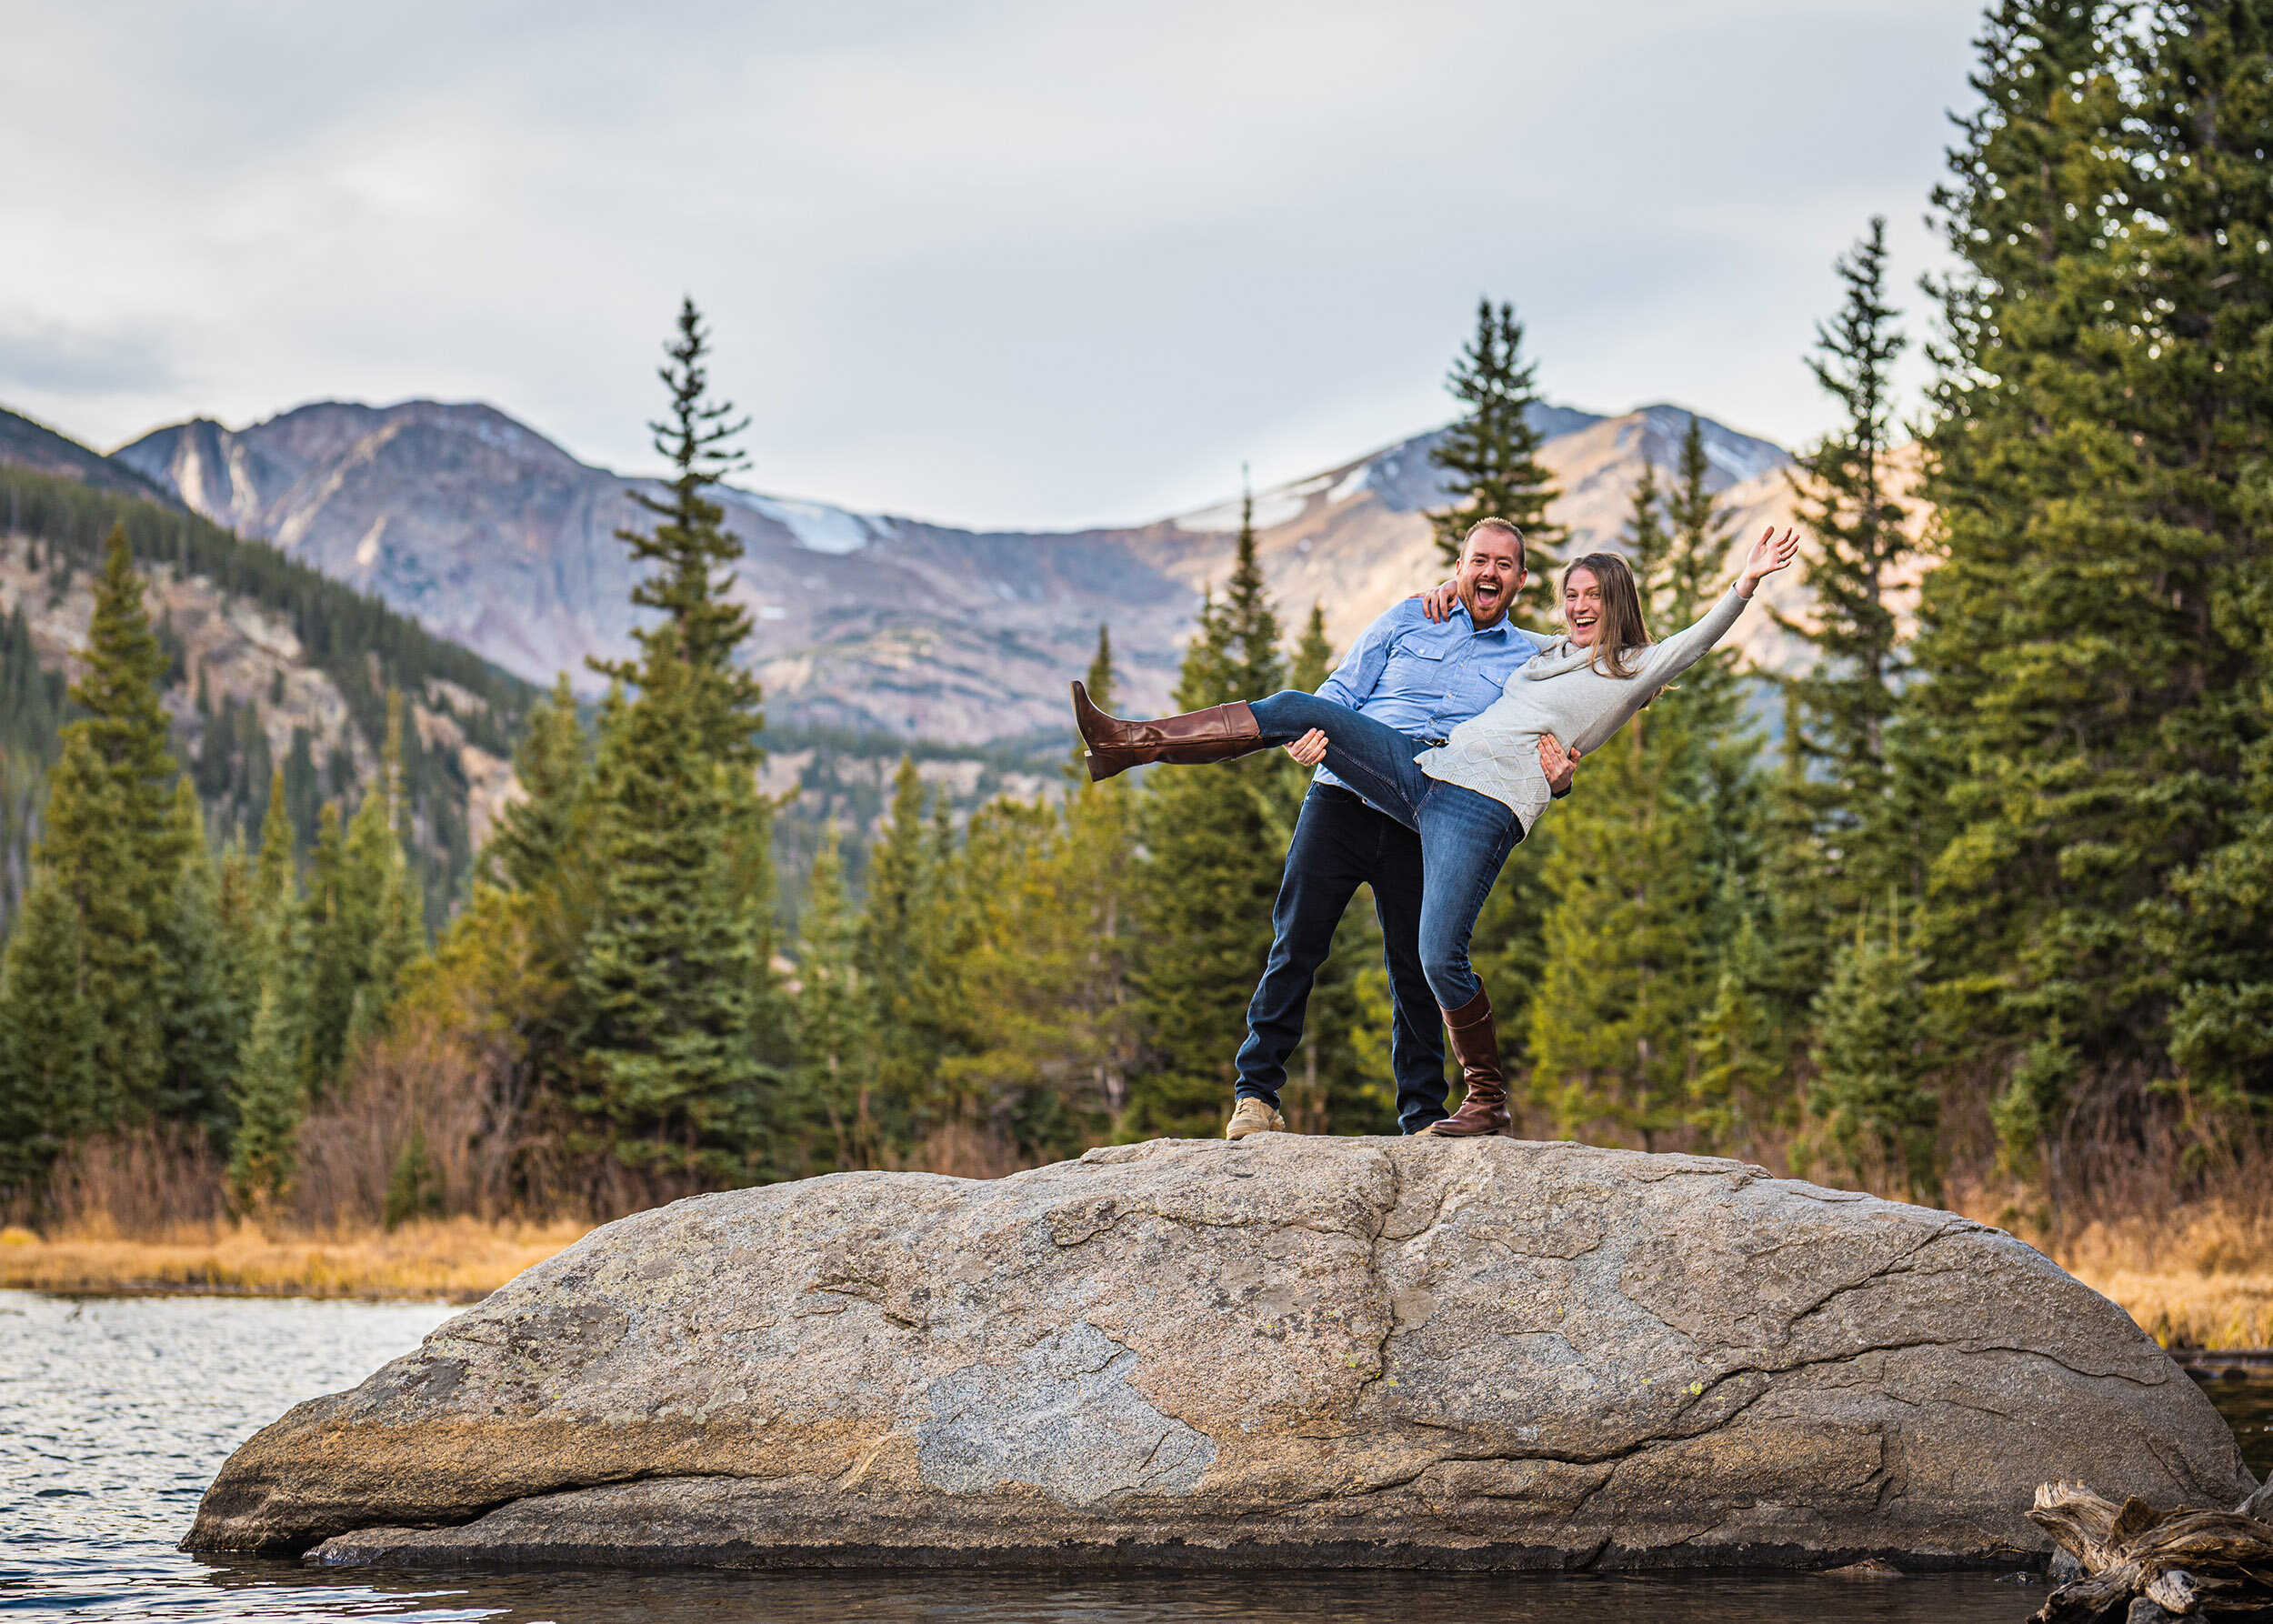 lost-lake-colorado-engagement-photographer-adventure-camping-hiking-fly-fishing (4).jpg